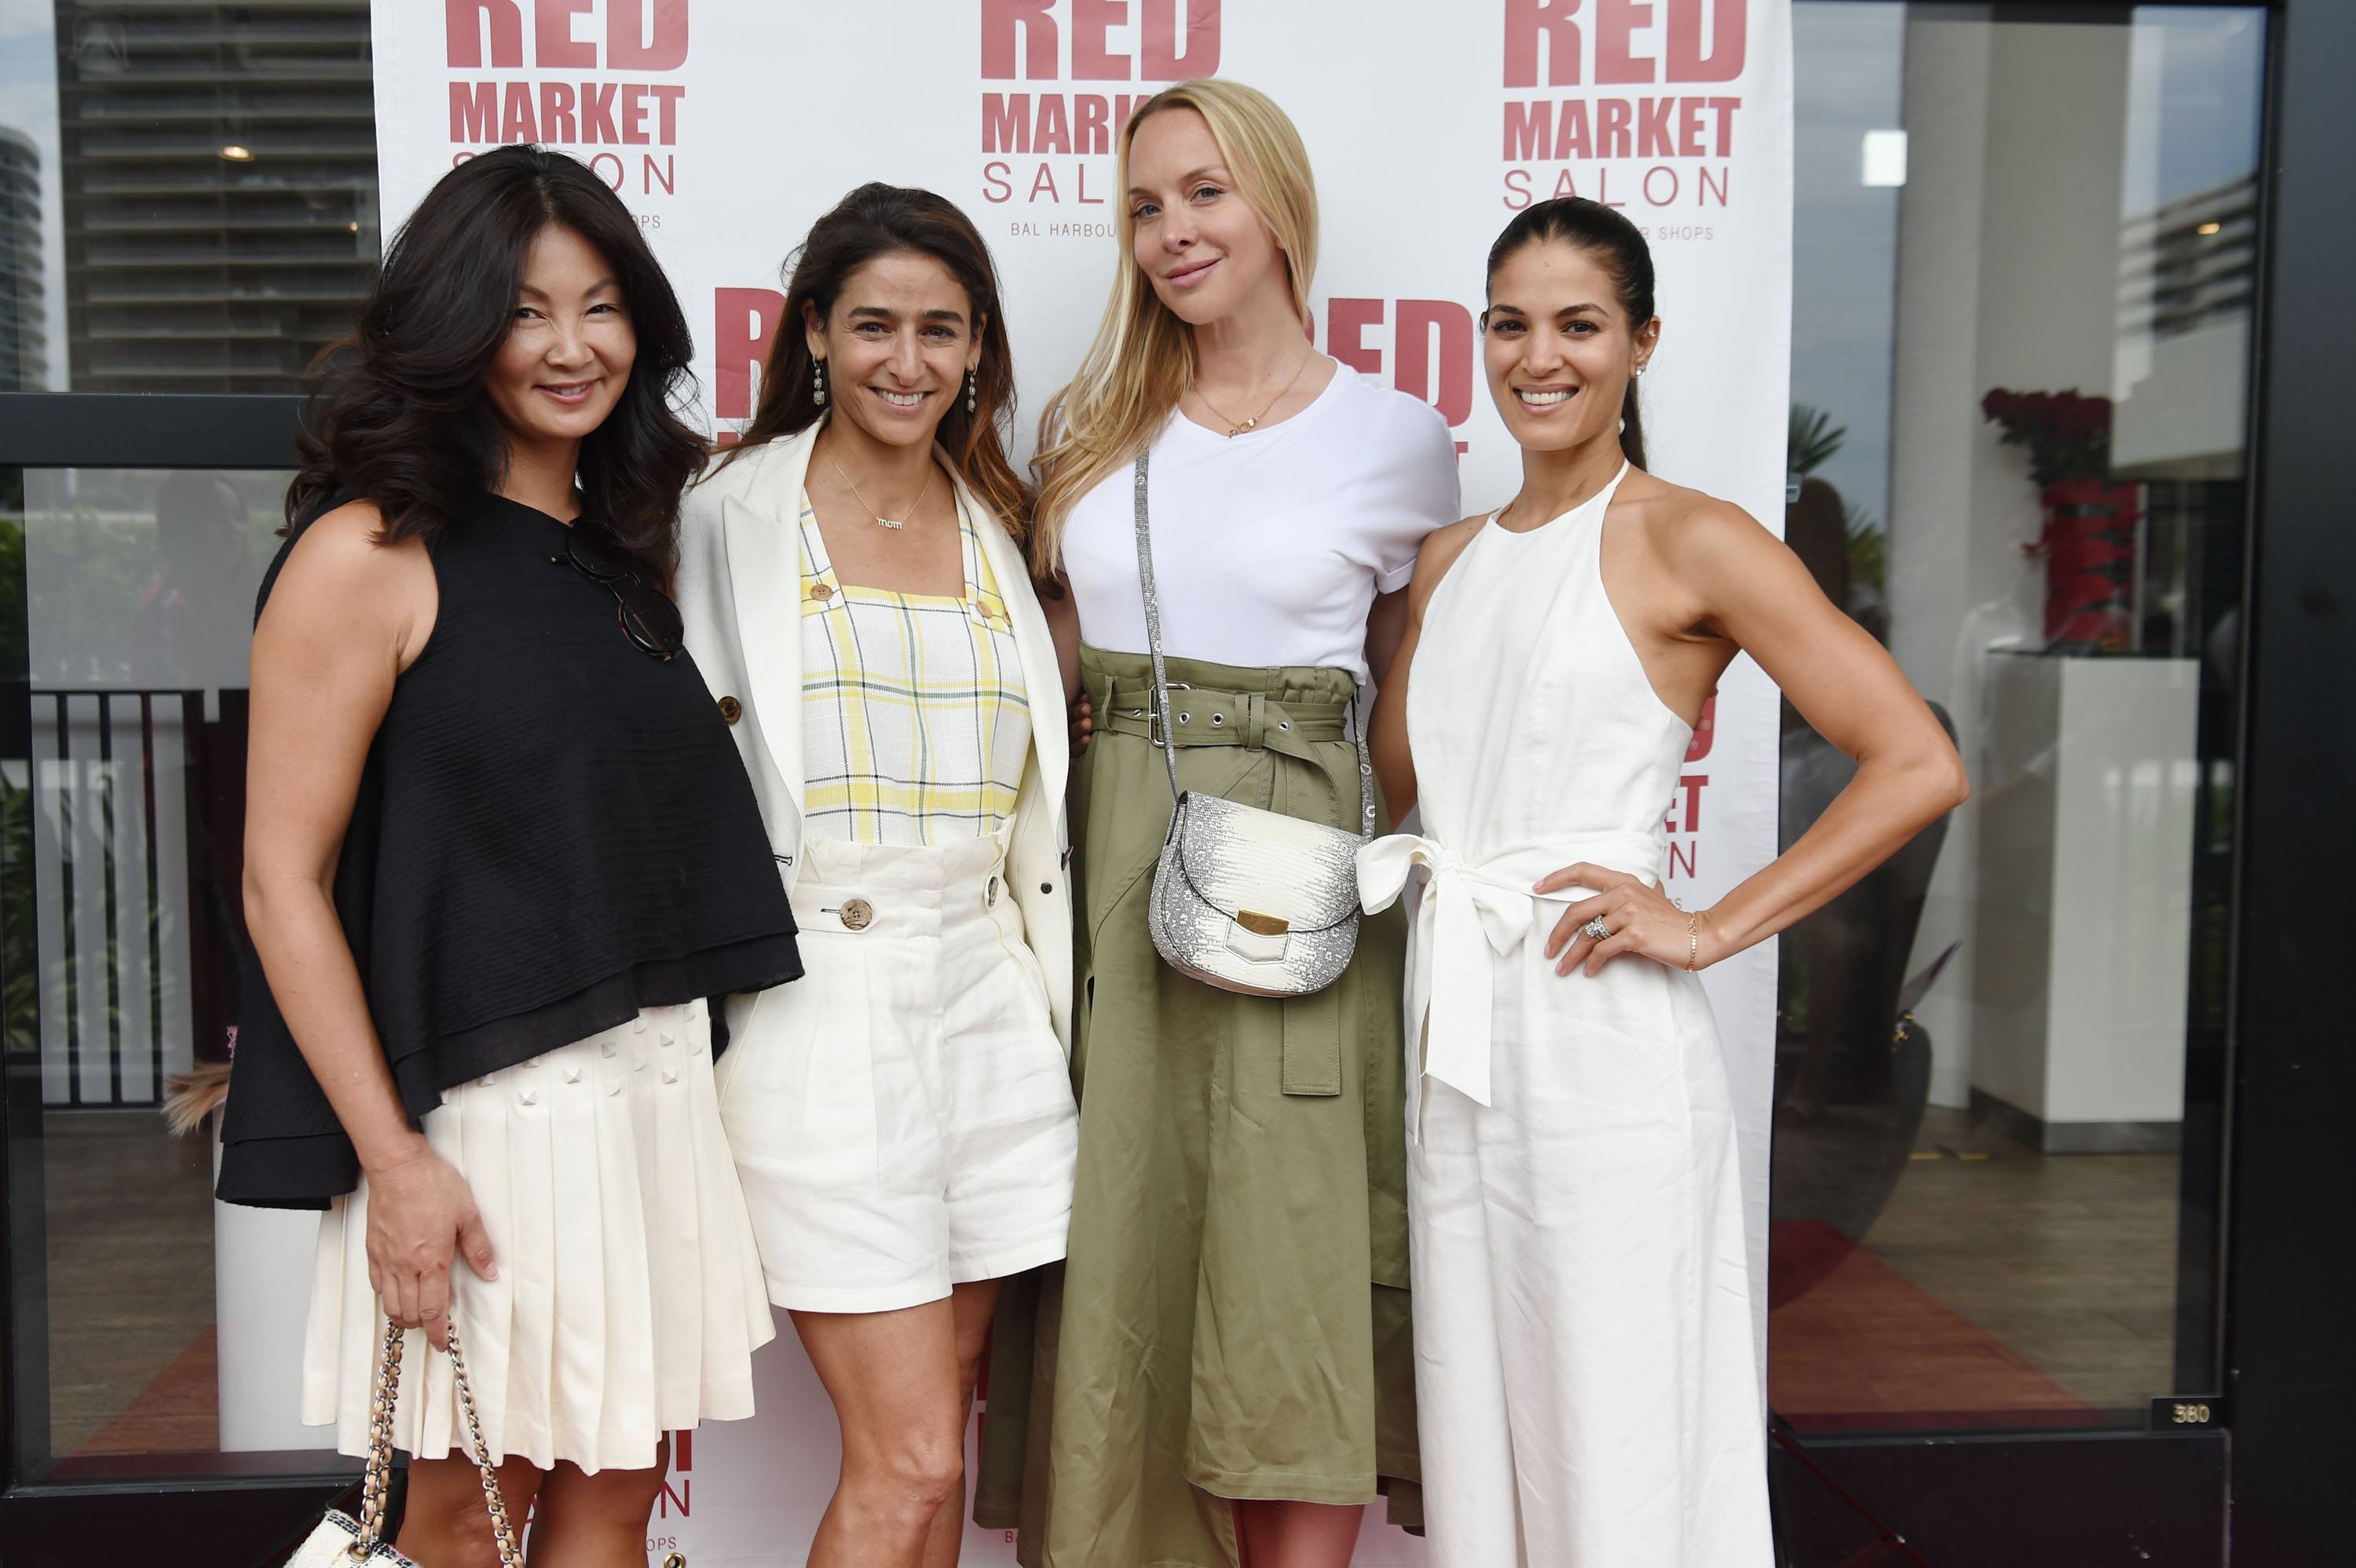 Siri Willoch Traasdahl, Nicole Sayfie Porcelli, Christina Getty, & Asha Elias at Red Market for Wine, Women and Shoes